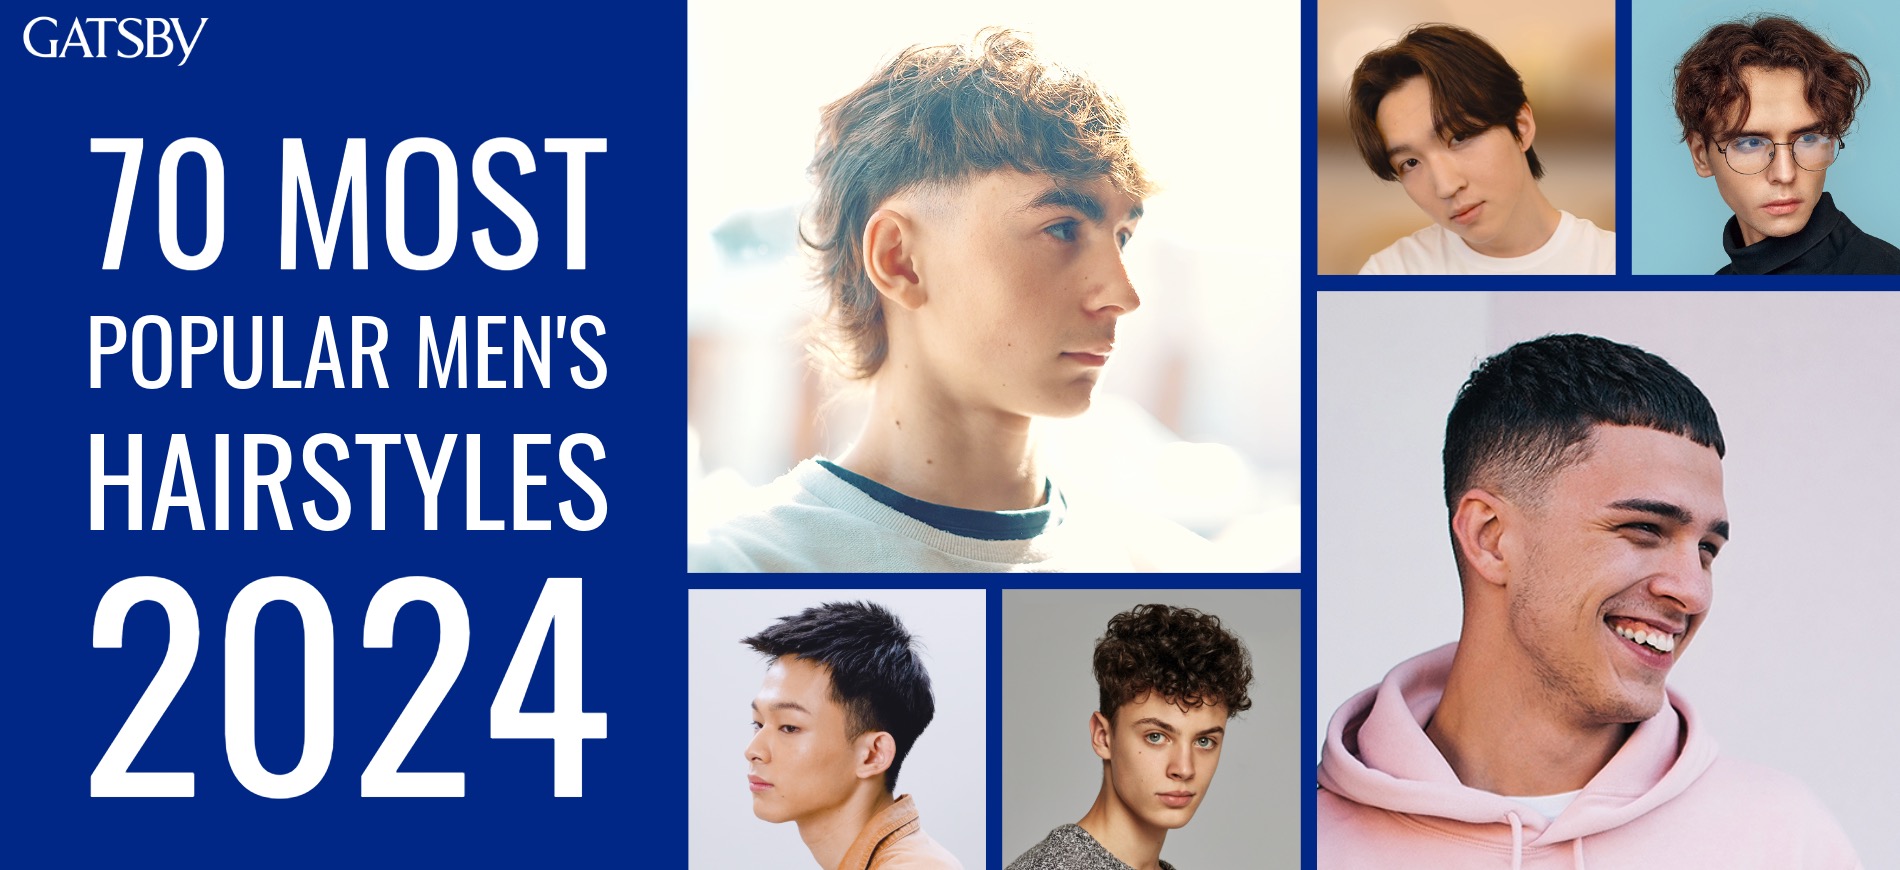 15+ Most Stylish Yet Simple Hairstyle For Men - The Dashing Man-smartinvestplan.com